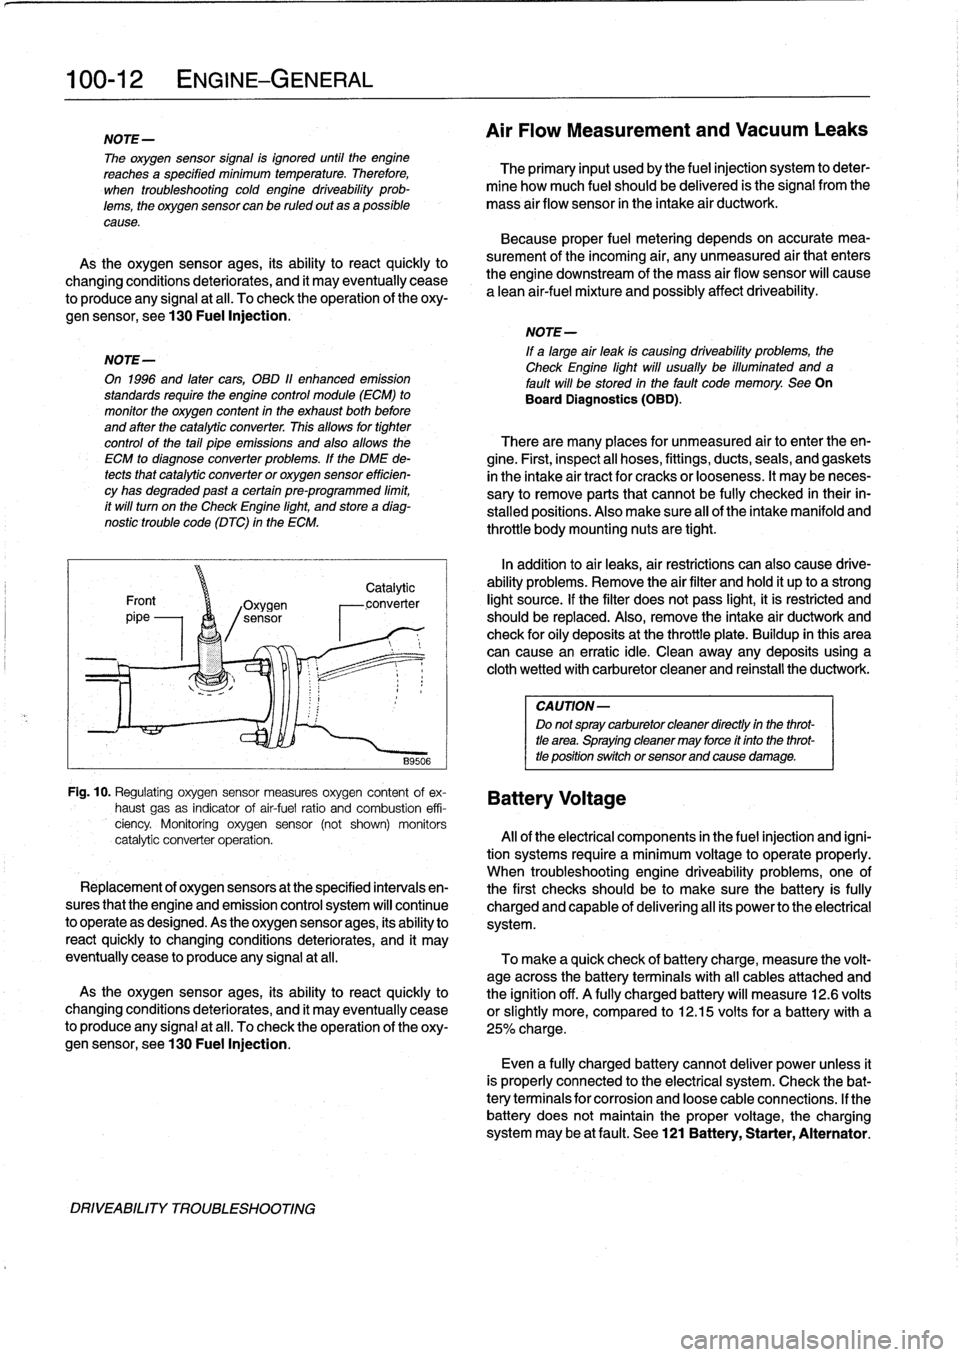 BMW 318i 1995 E36 Workshop Manual 
100-
1
2
ENGINE-GENERAL

NOTE-

The
oxygen
sensor
signal
is
ignored
until
the
engine
reachesa
specified
minimum
temperature
.
Therefore,

	

The
primary
input
usedby
the
fuel
injection
system
to
dete